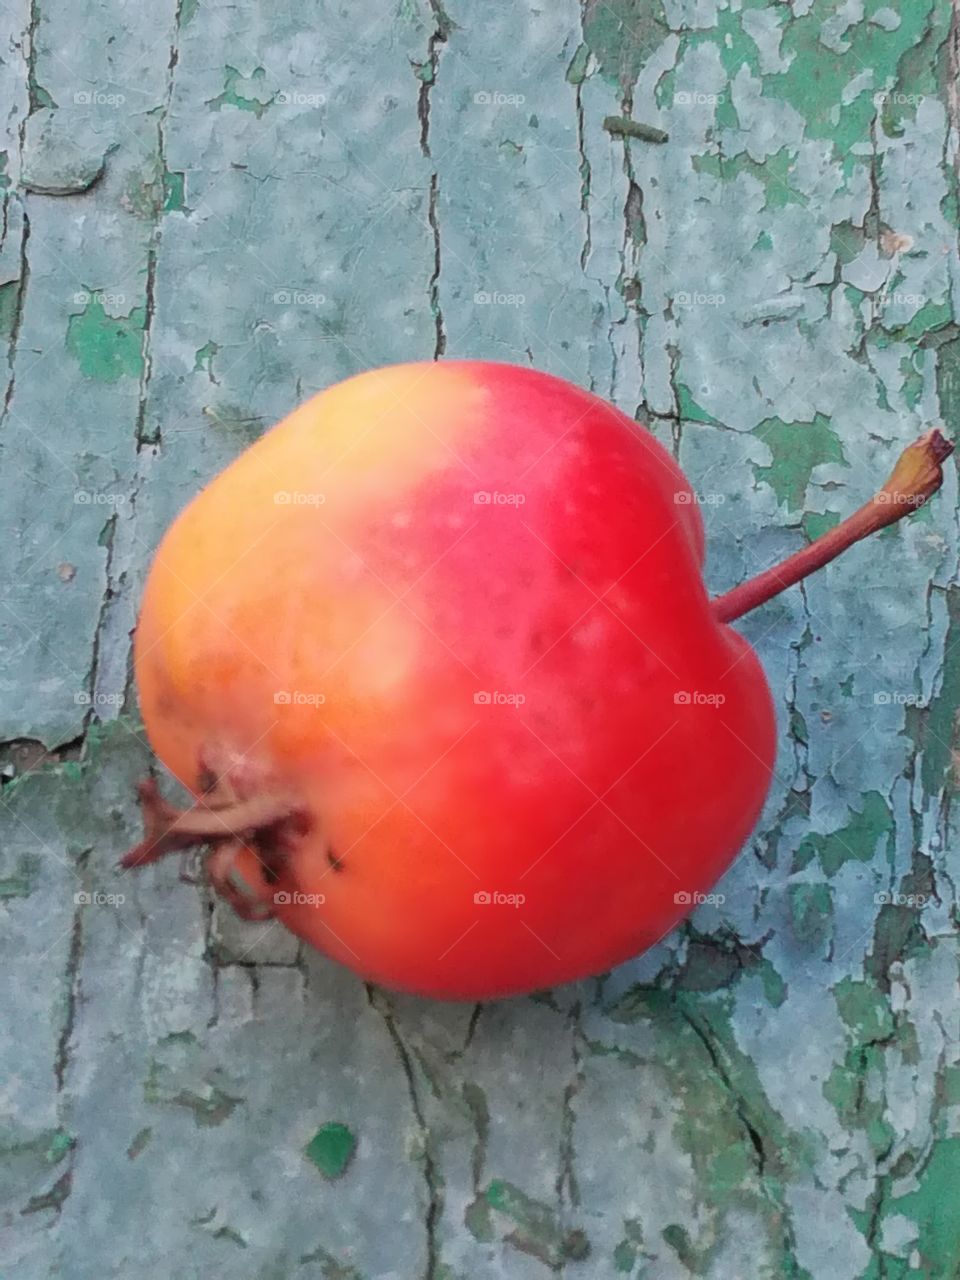 Small red apple 2